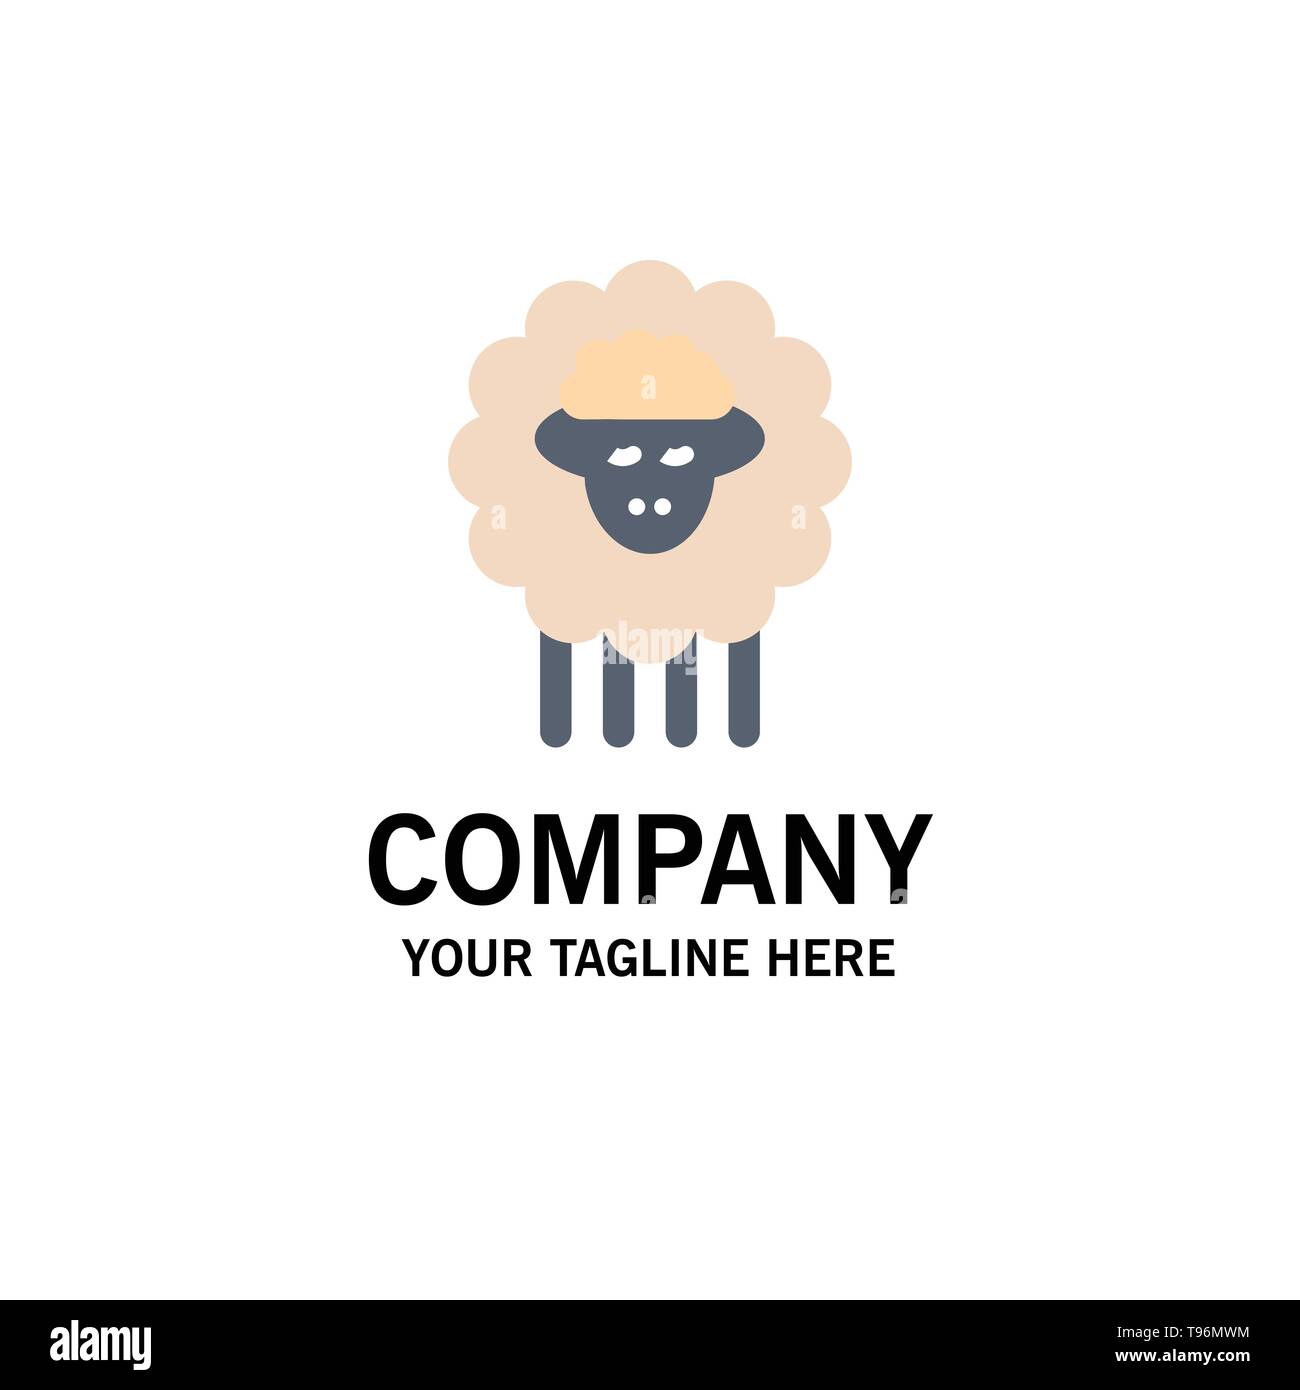 Mutton, Ram, Sheep, Spring Business Logo Template. Flat Color Stock Vector